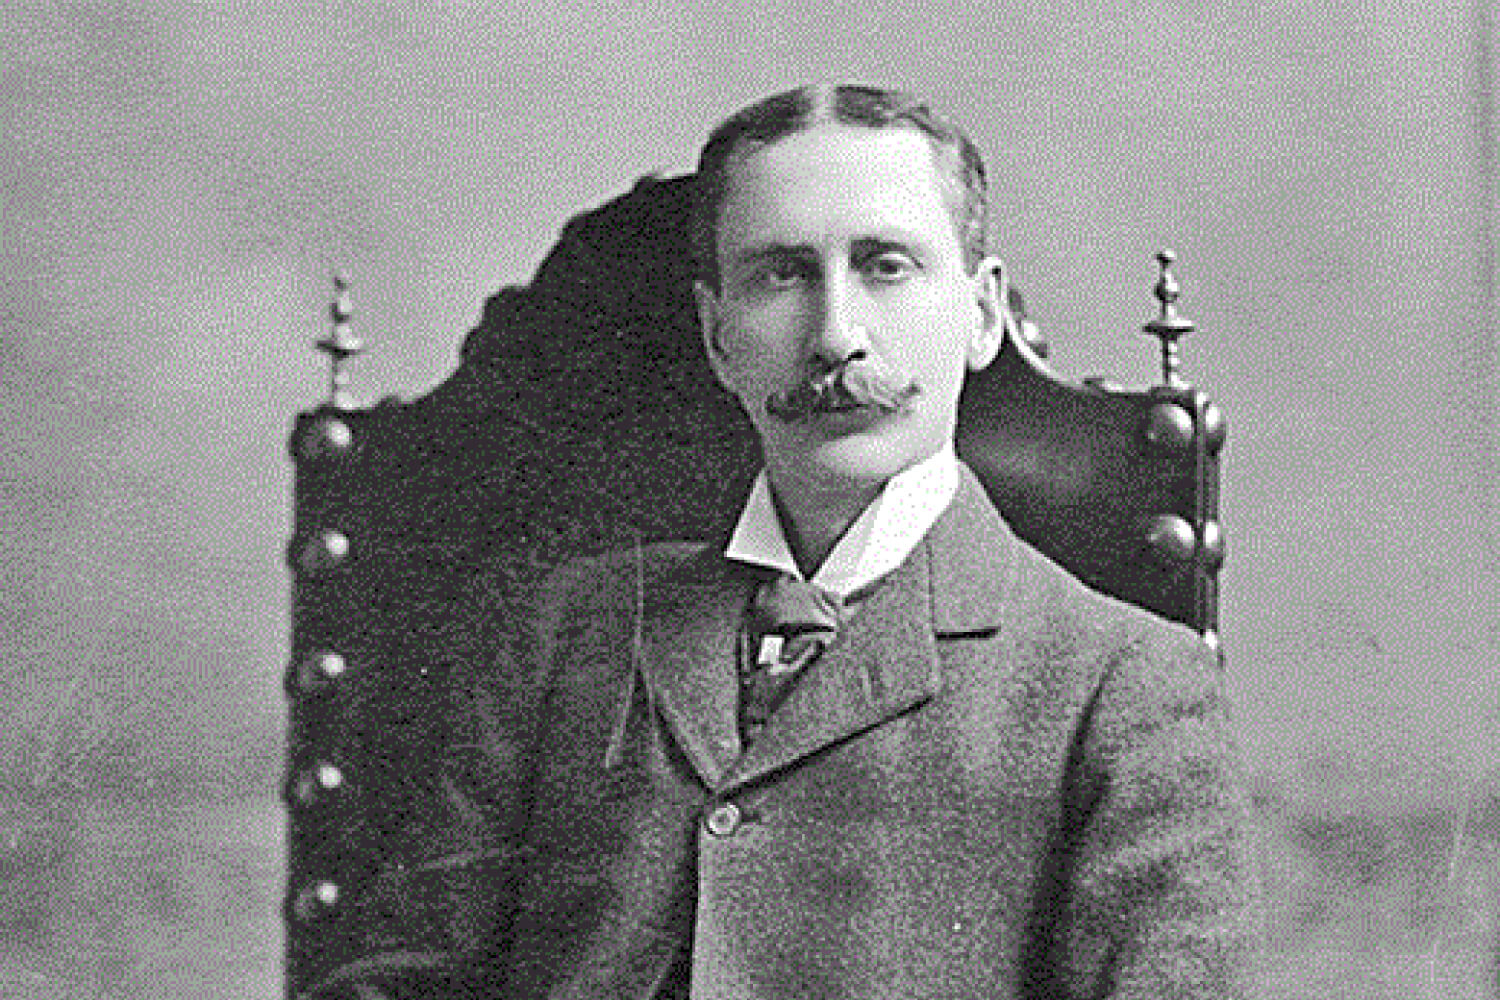 Black and white photo of Edward Angle, the father of orthodontics